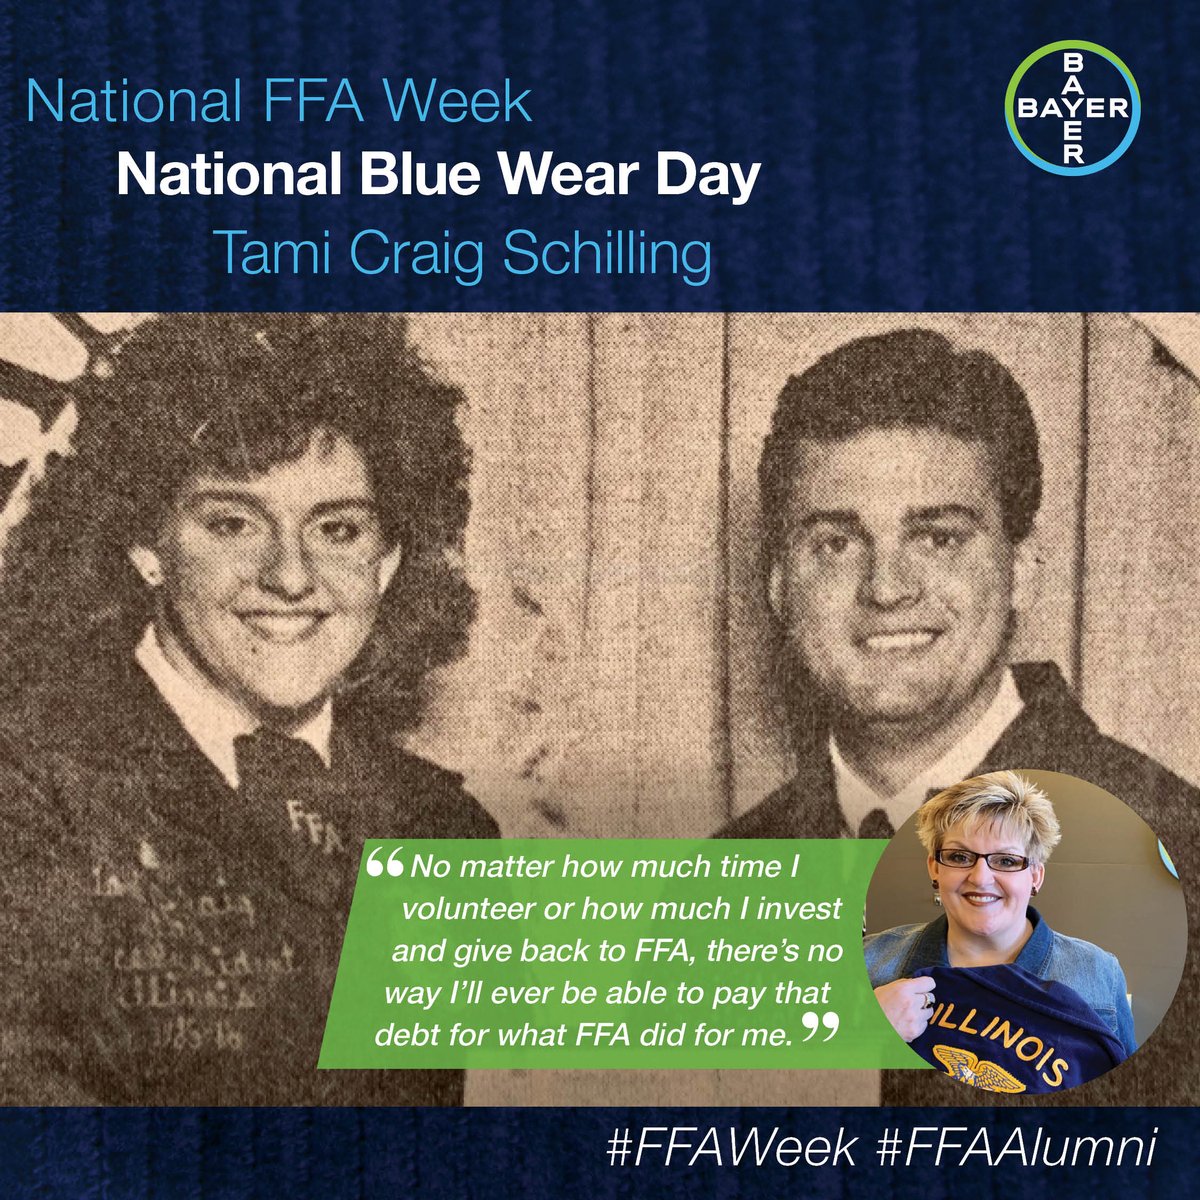 In the spirit of National Wear Blue Day & #FFAWeek, join the @NationalFFA sea of blue & share what the blue jacket means to you! #PassTheJacket